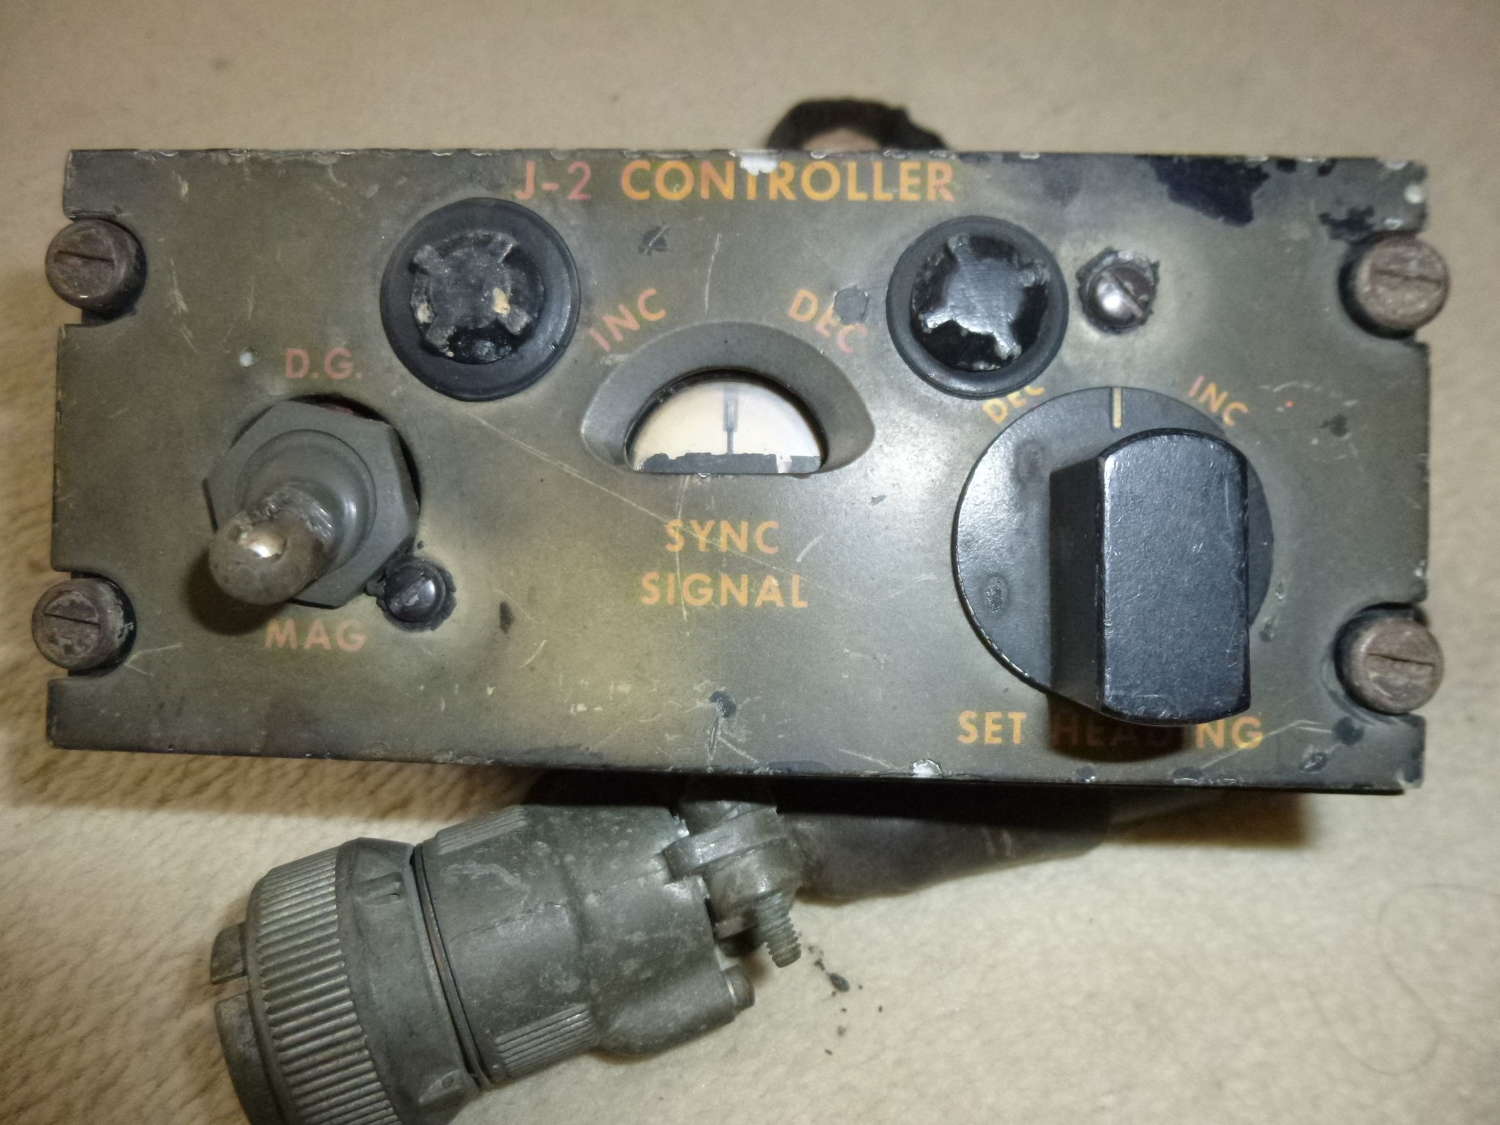 RCAF sperry compass controller